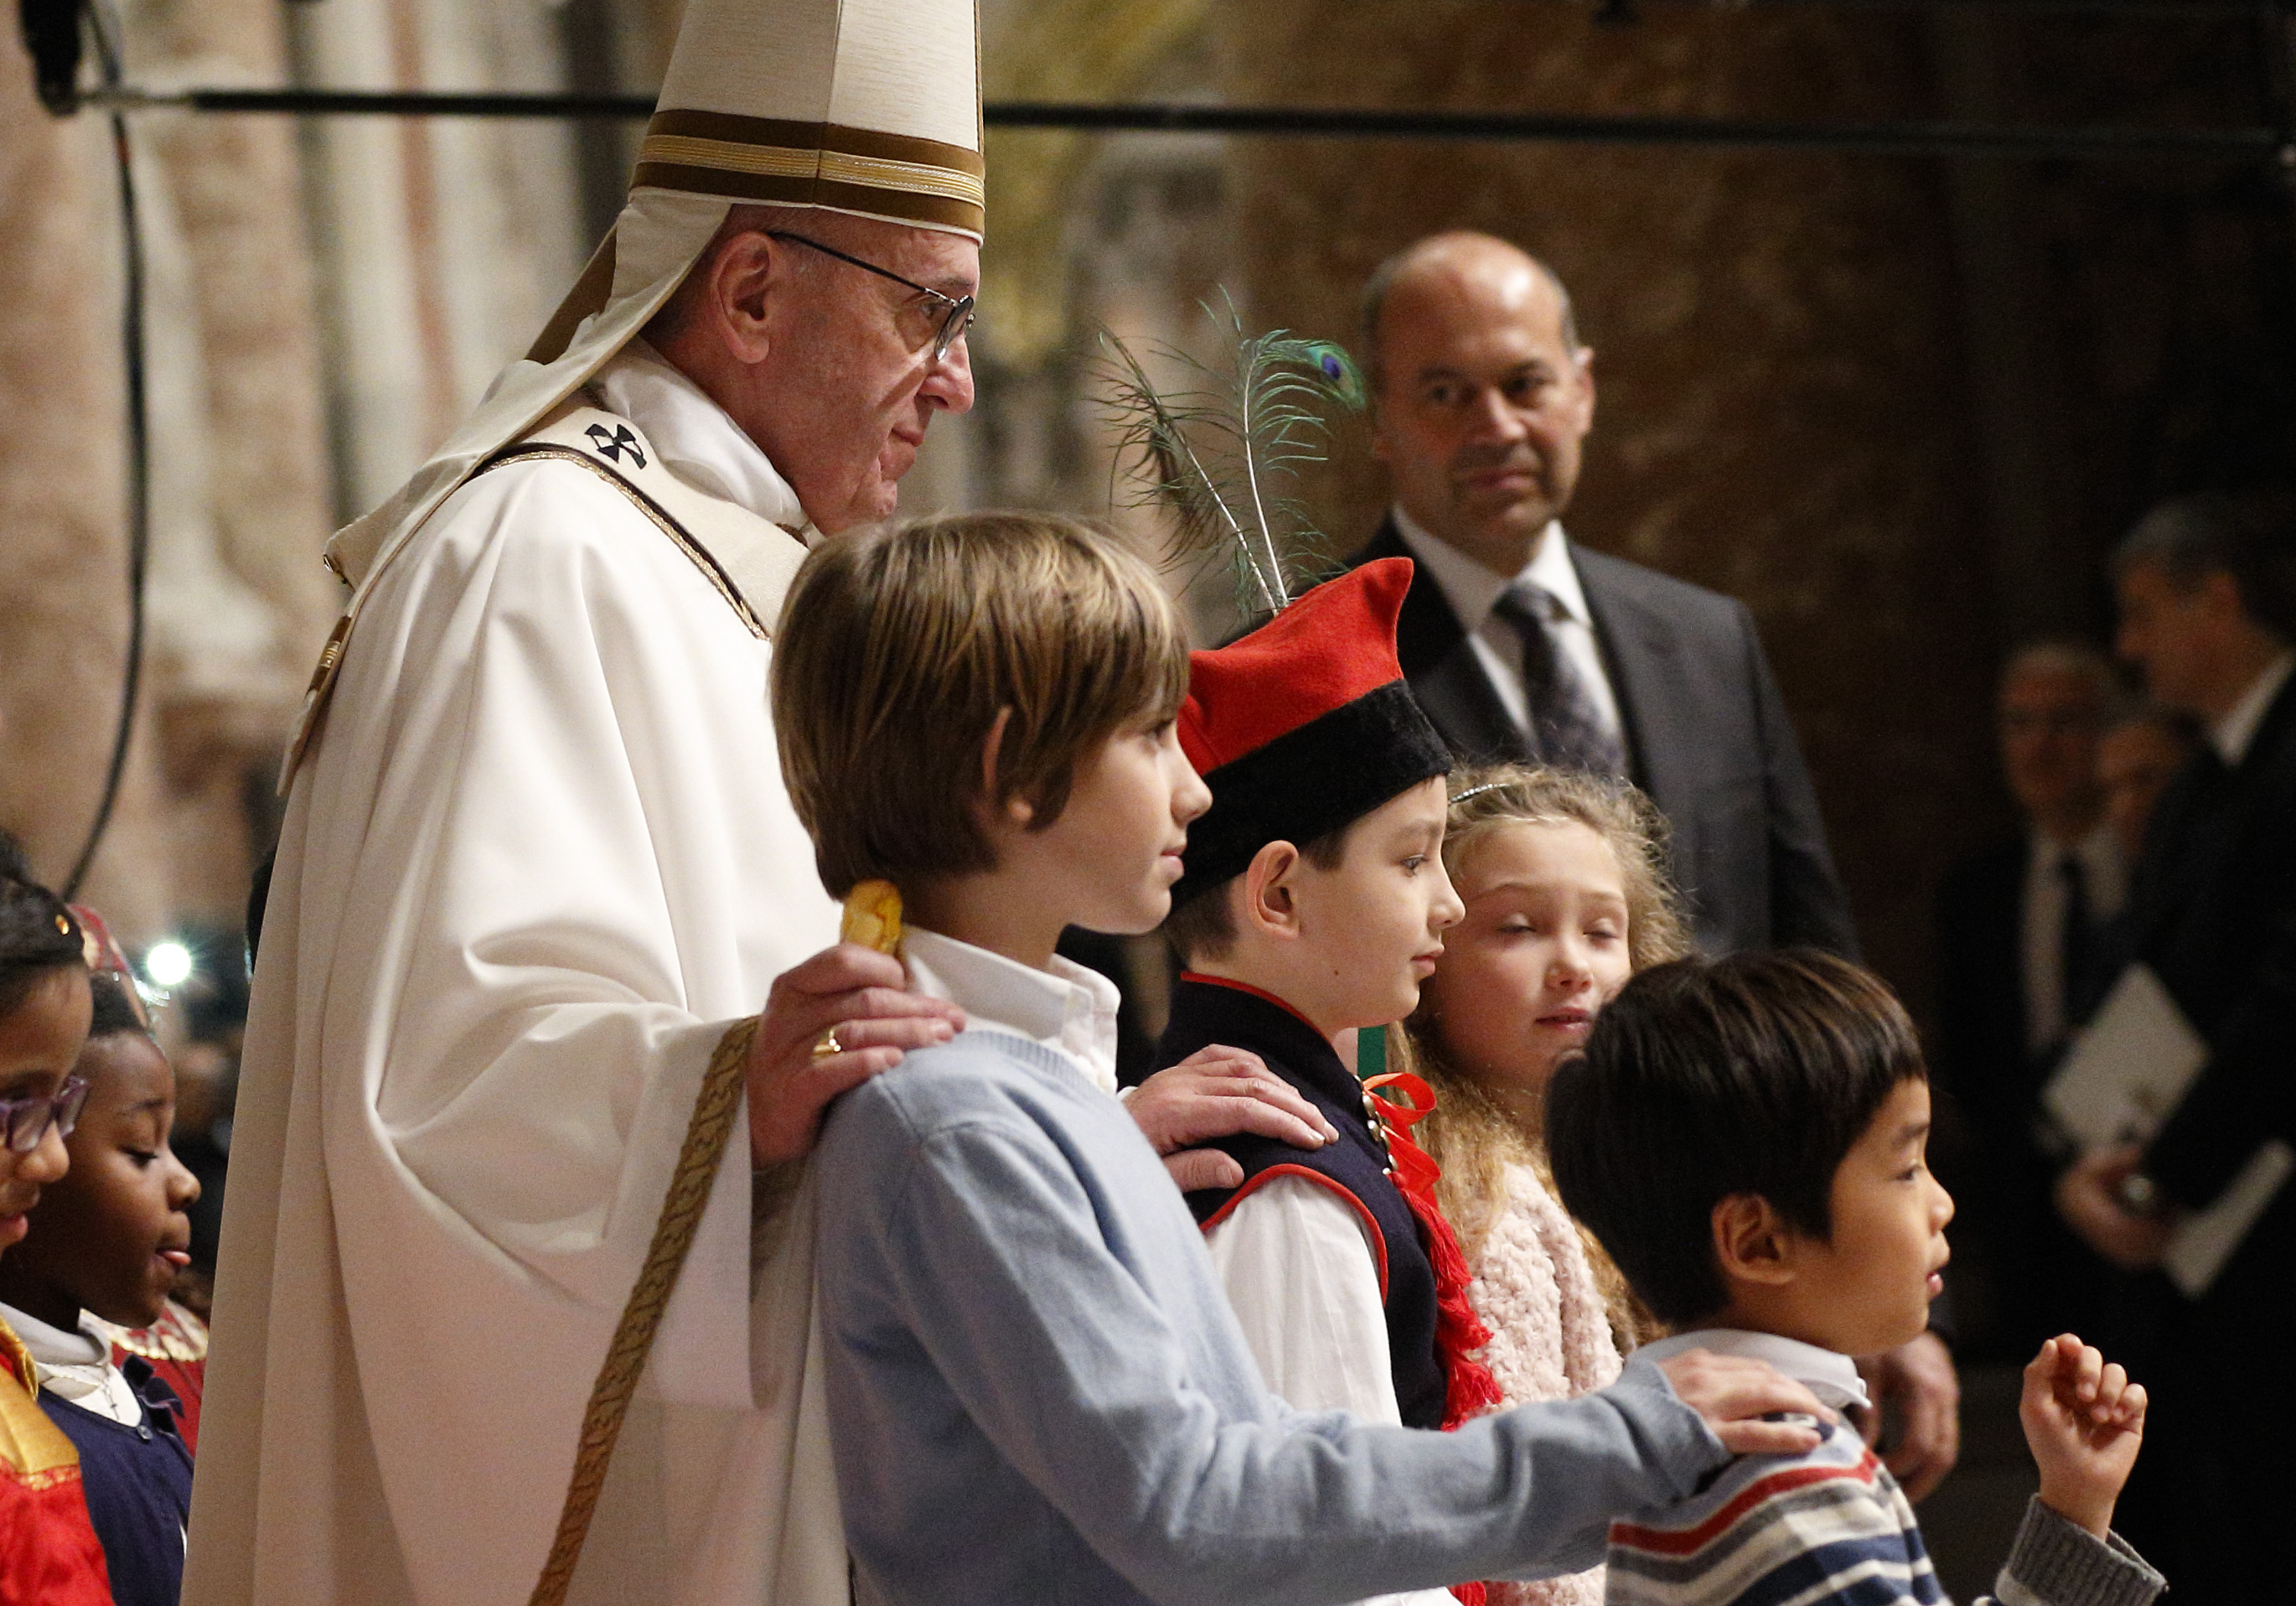 Pope Francis walks with children at the conclusion of Christmas Eve Mass in Peter's Basilica at the Vatican Dec. 24. (CNS photo/Paul Haring)